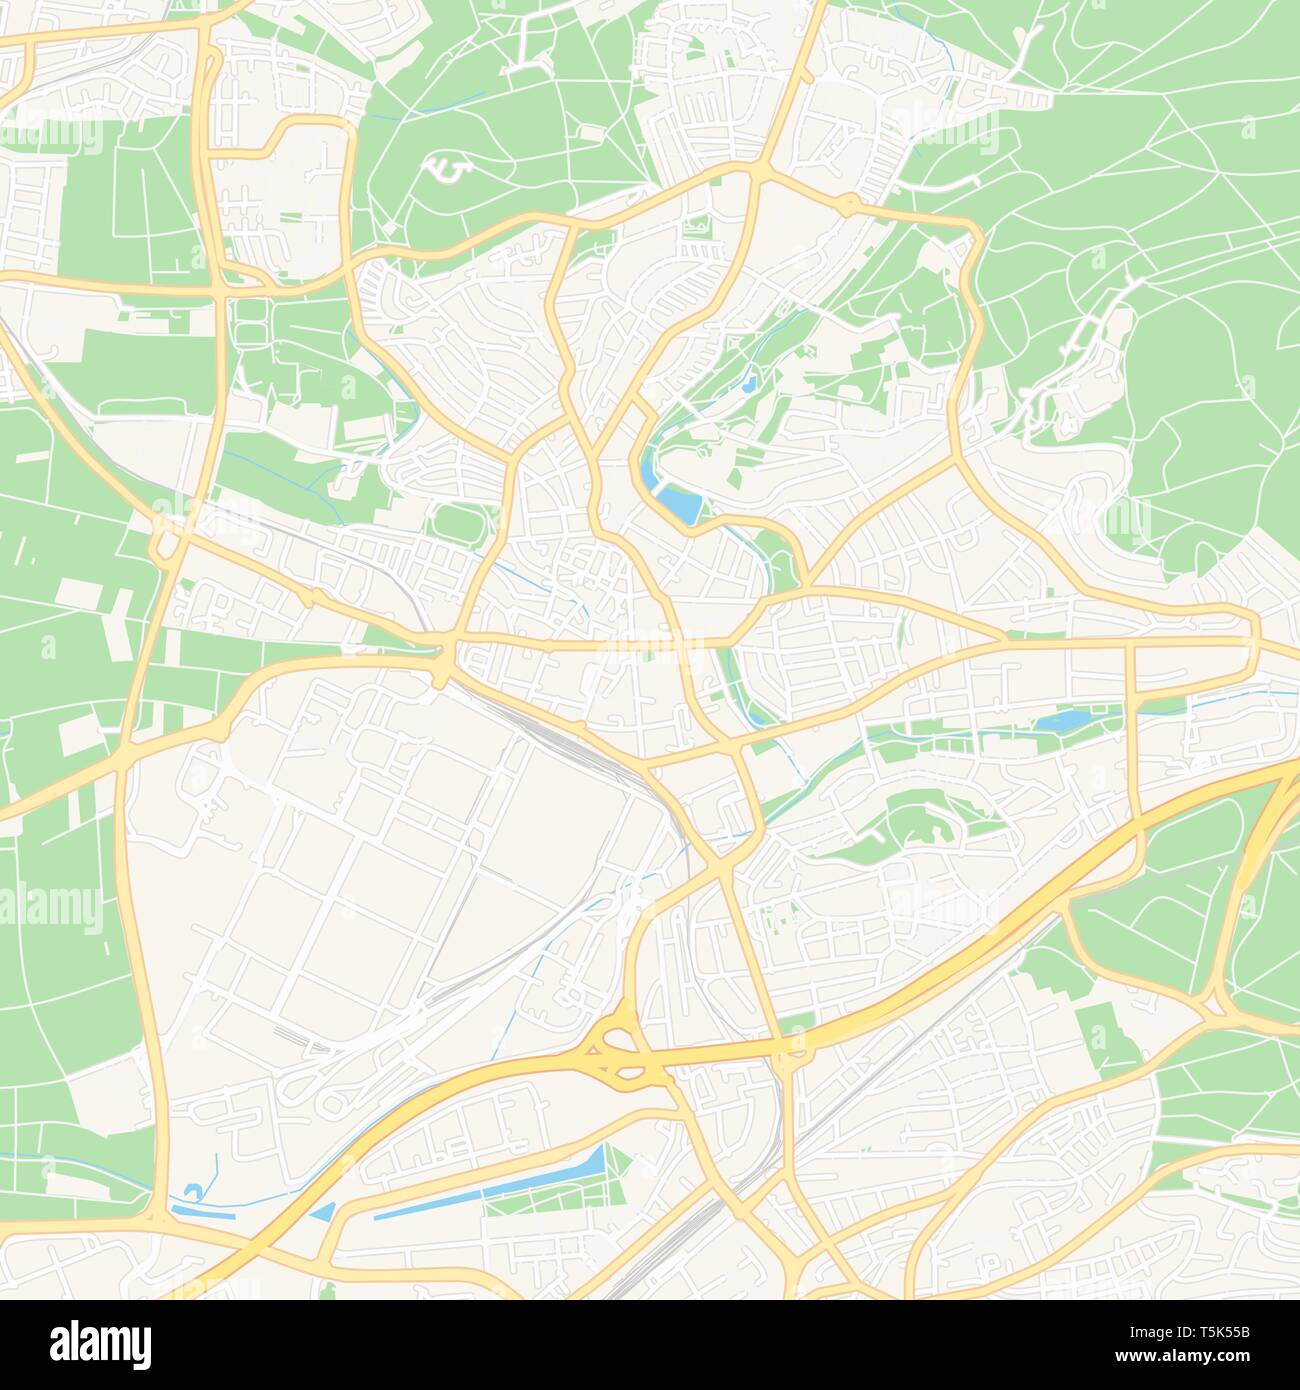 Printable map of Sindelfingen, Germany with main and secondary roads and larger railways. This map is carefully designed for routing and placing indiv Stock Vector